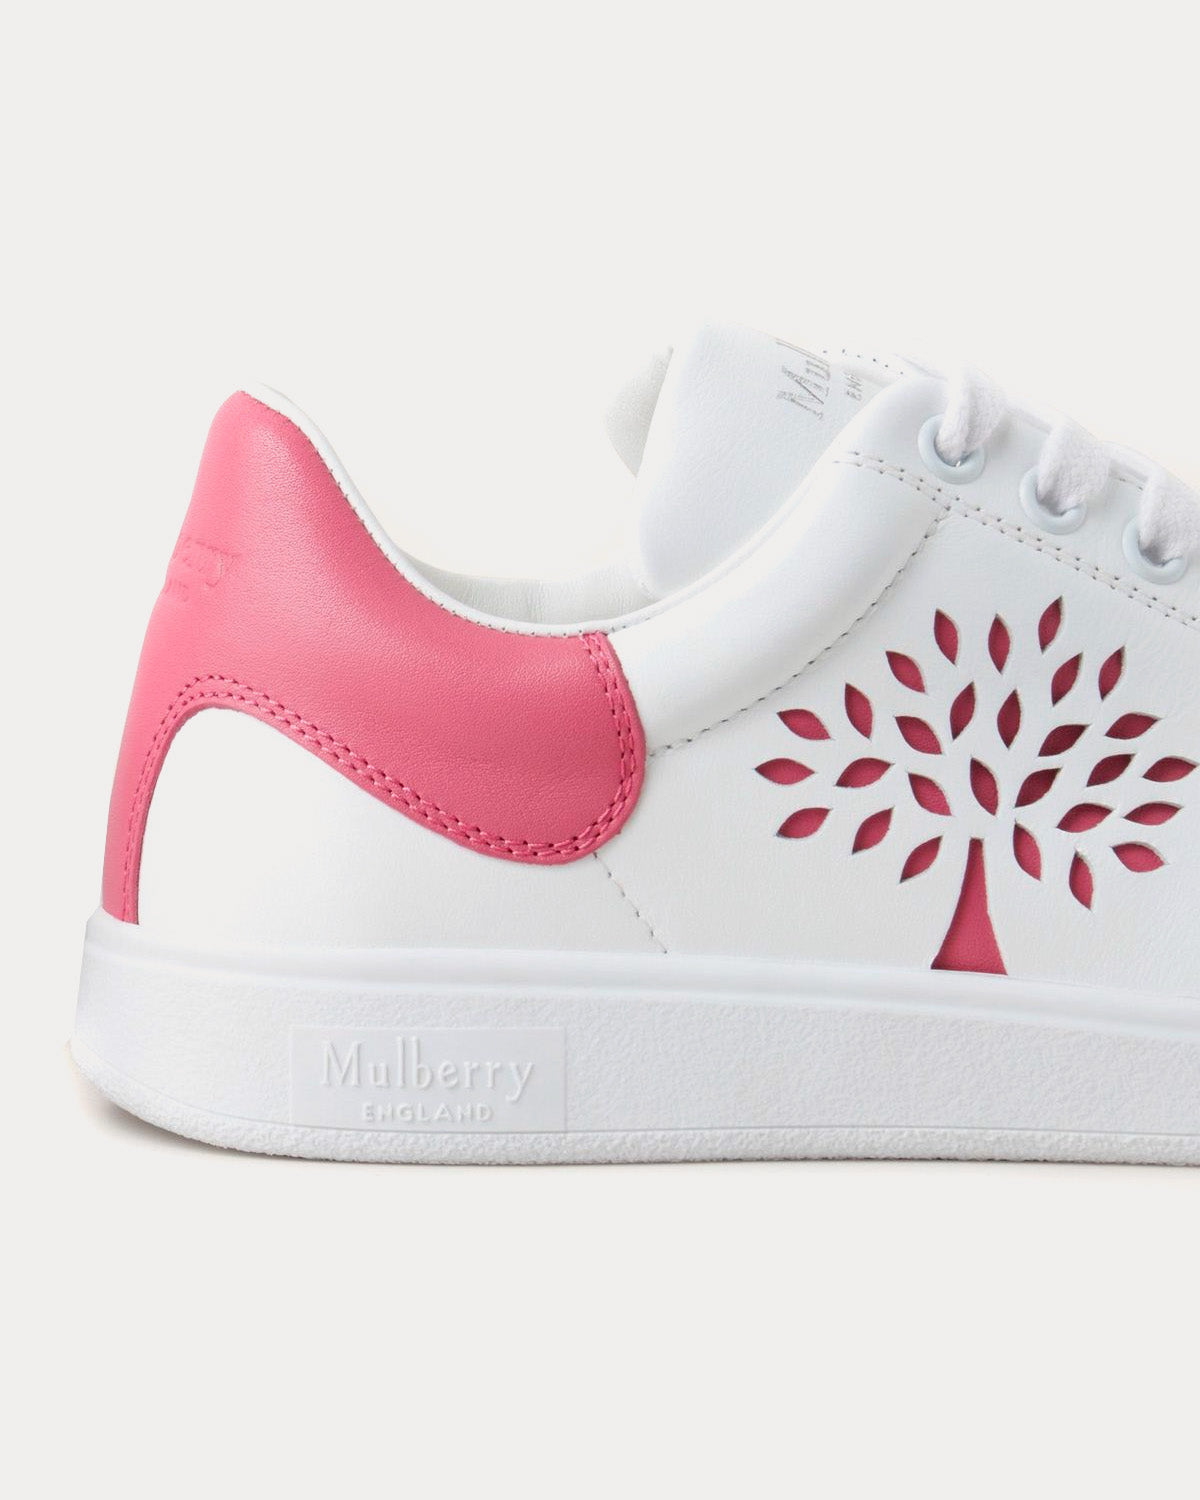 Mulberry - Tree Tennis Bovine Leather Geranium Pink Low Top Sneakers